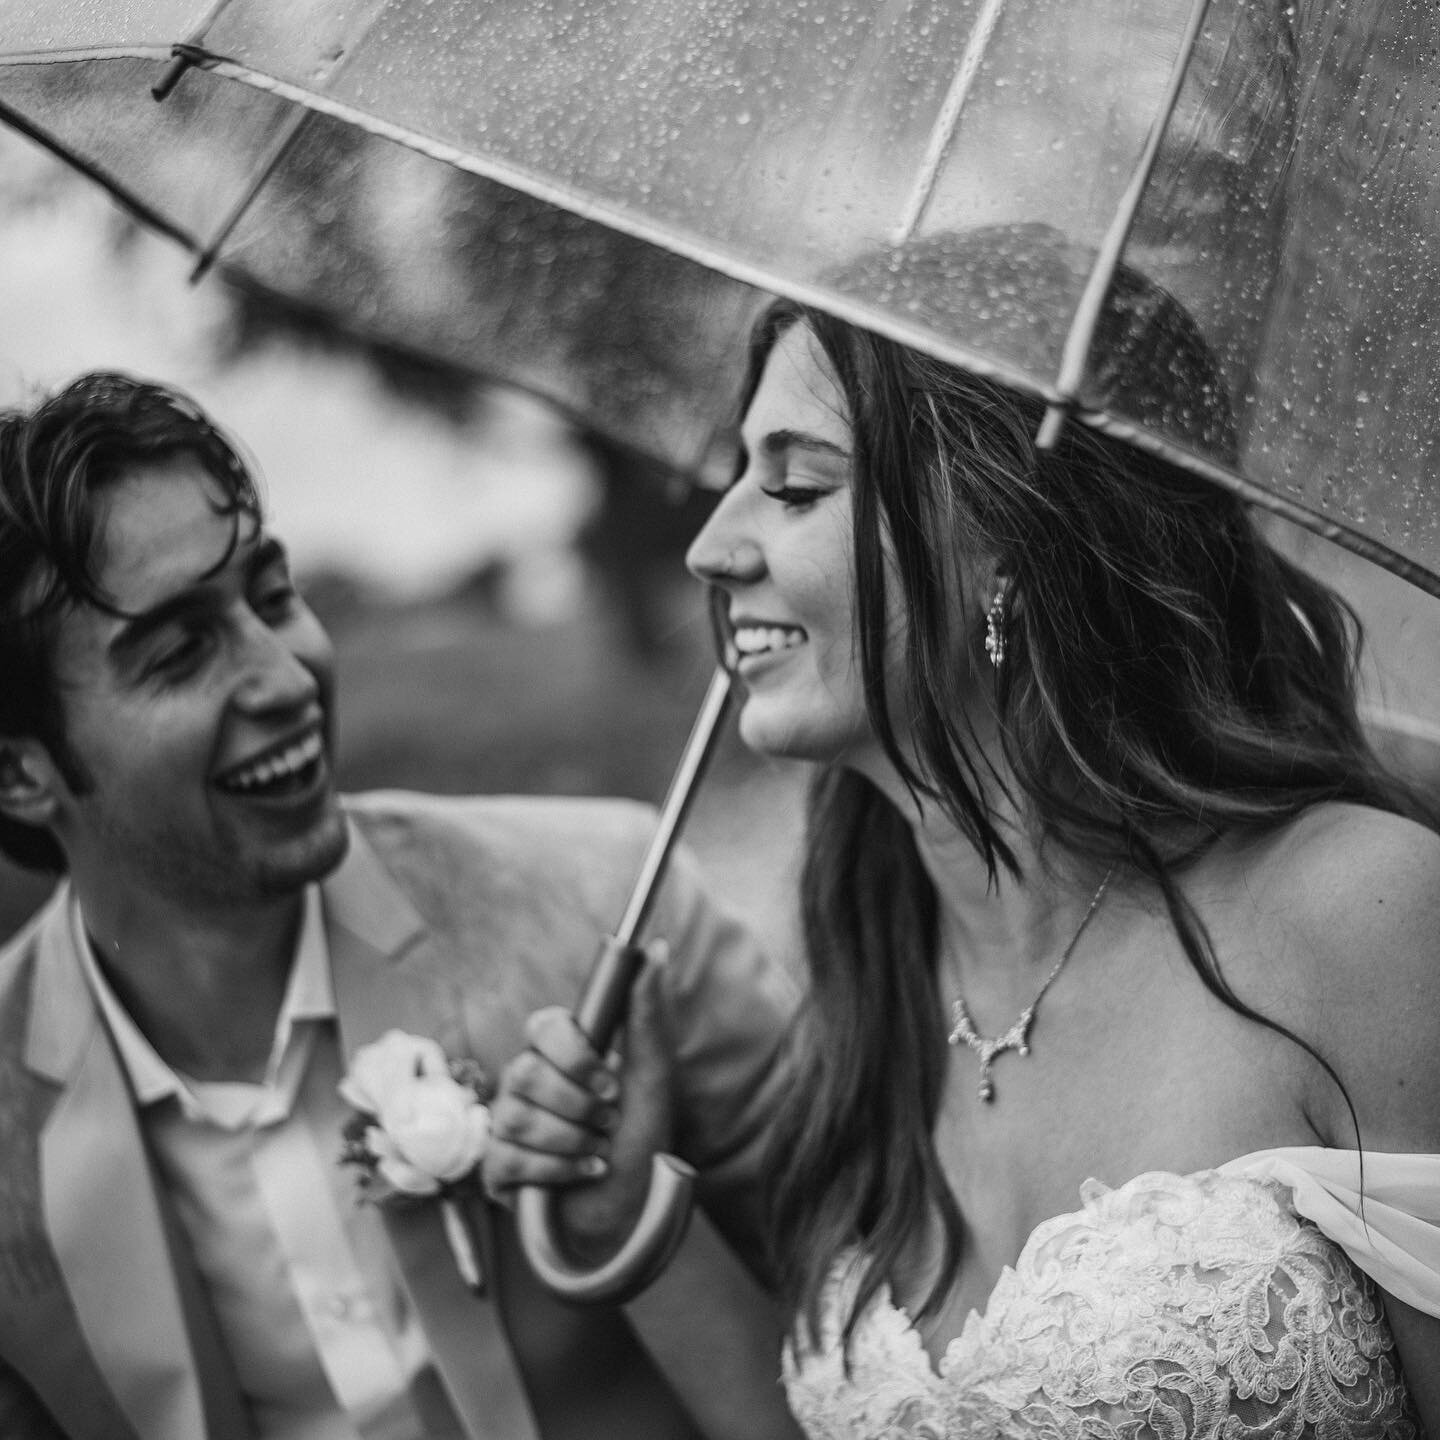 The most beautiful, rainy, love filled wedding. With only their closest family and friends, Garrett &amp; Olivia started their new chapter together on Friday.